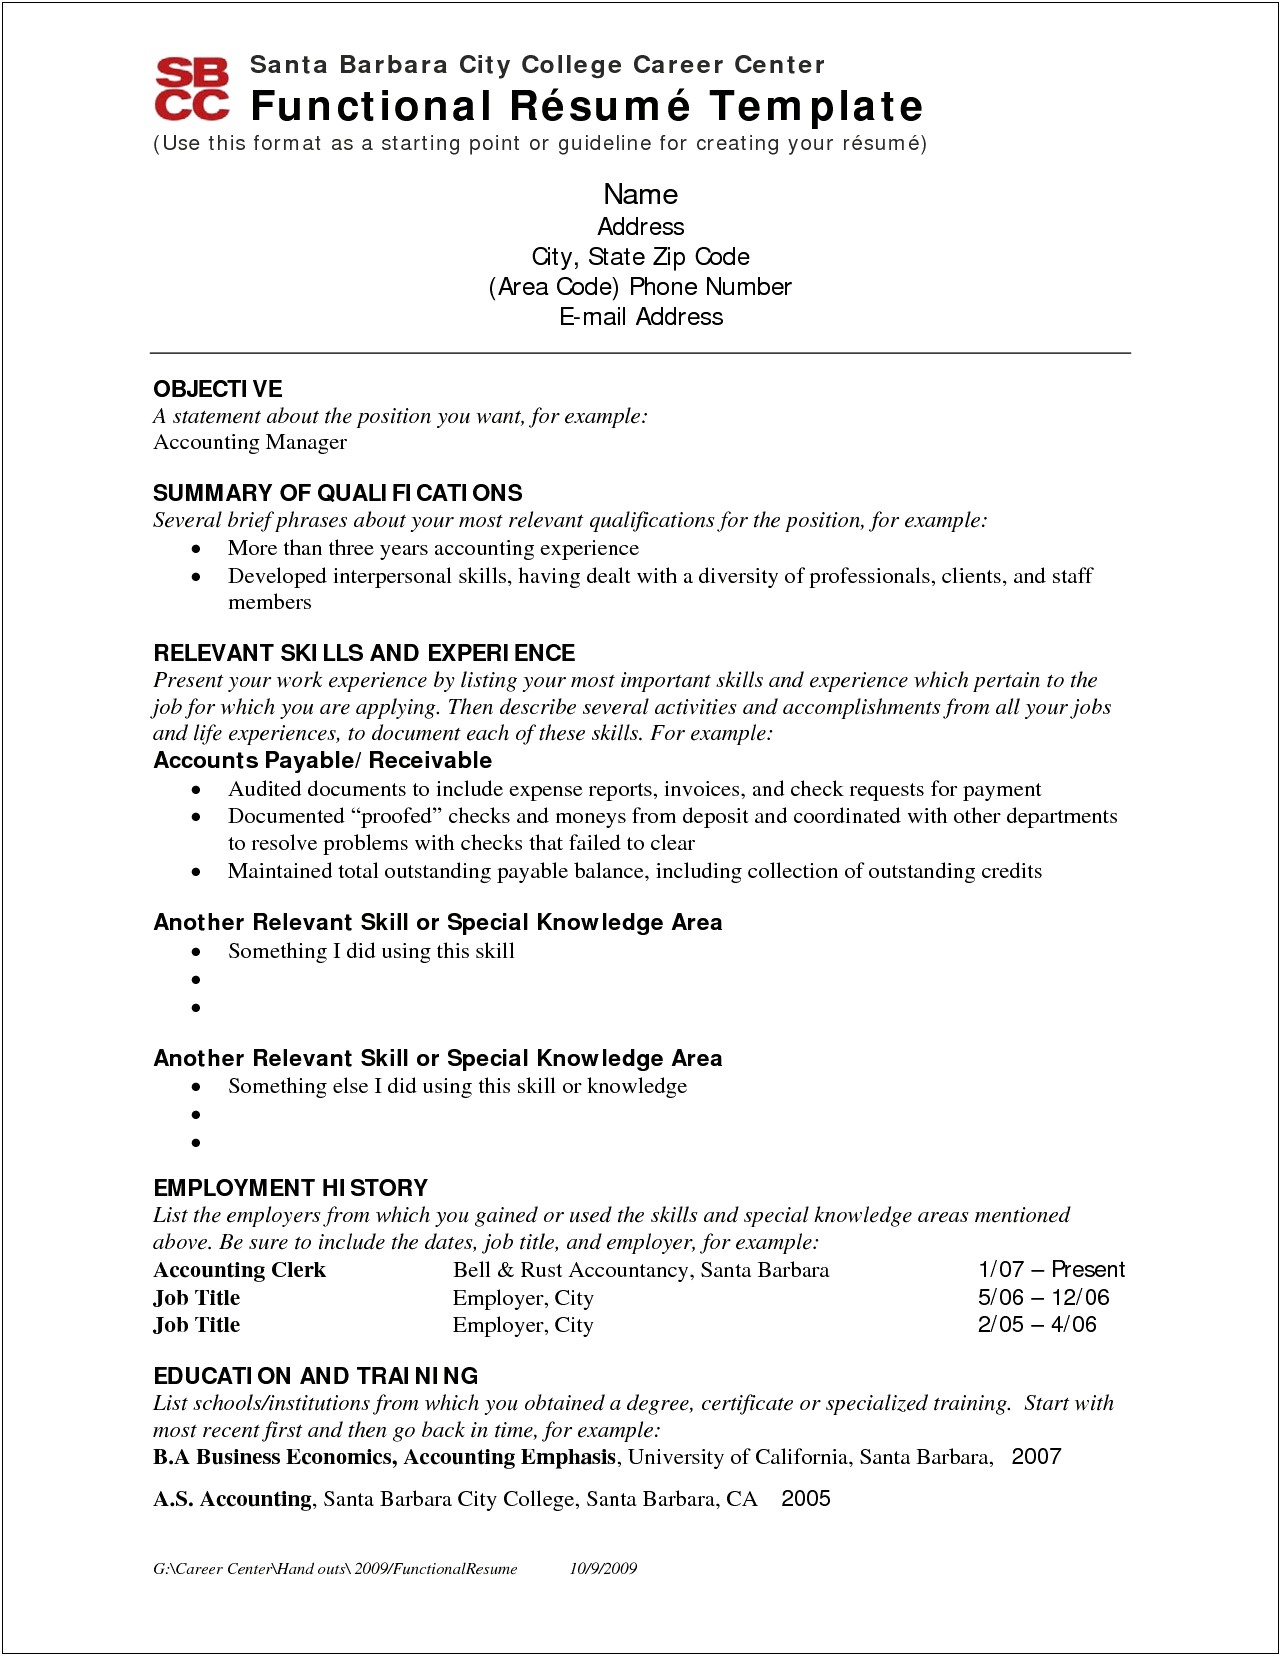 Examples Of Job Title On Resume